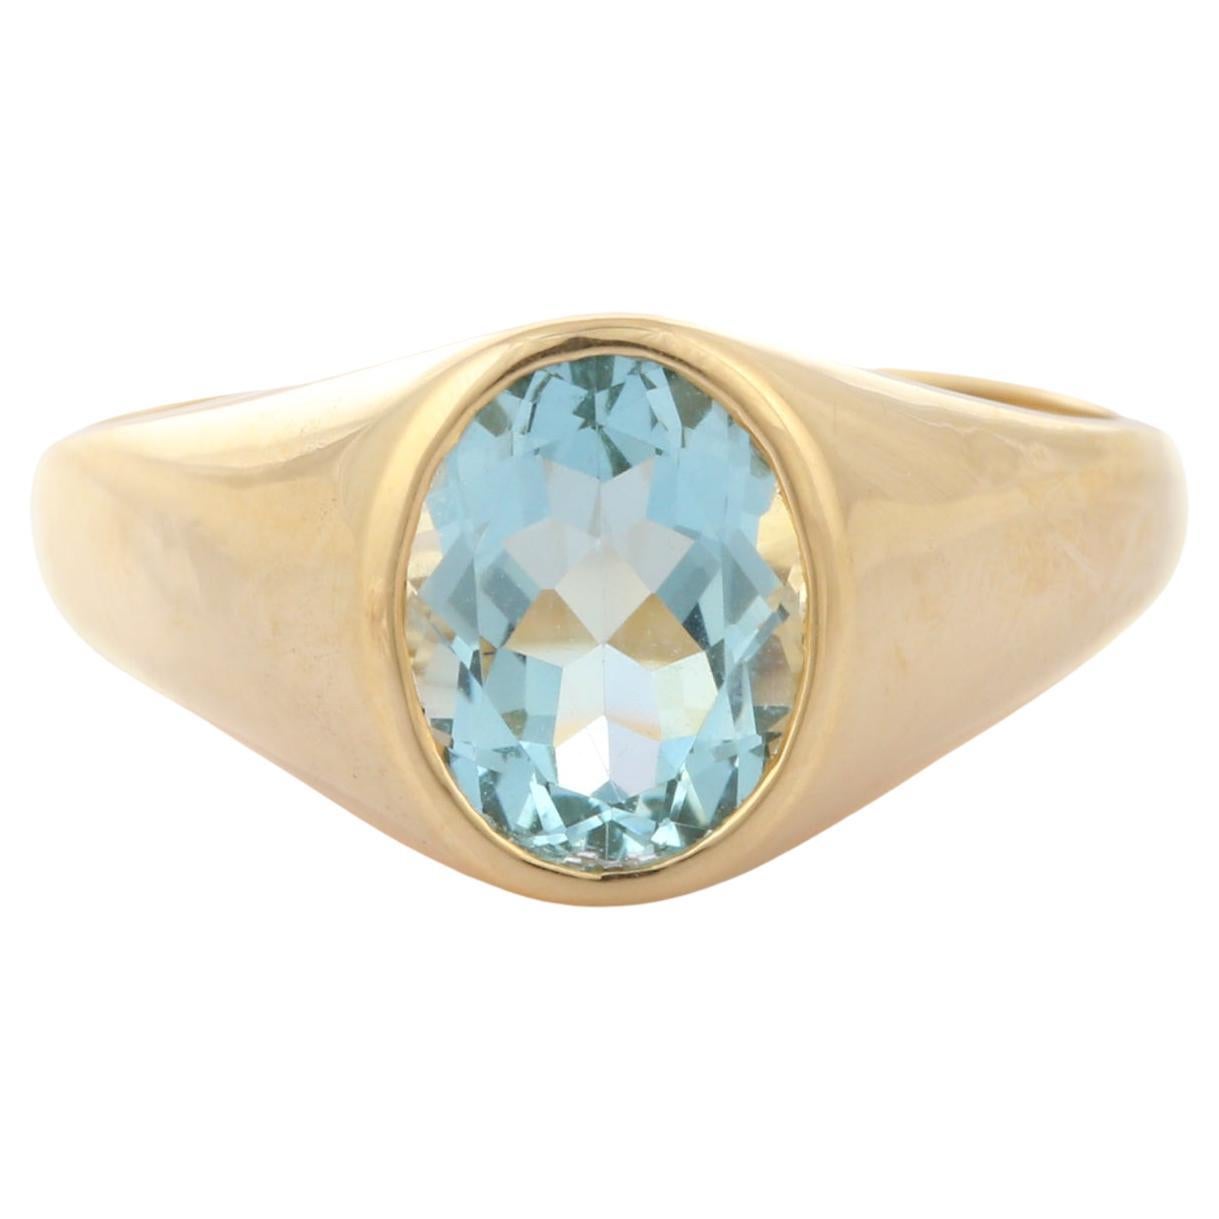 For Sale:  14K Yellow Gold 1.62 Carat Oval Cut Aquamarine Engagement Ring